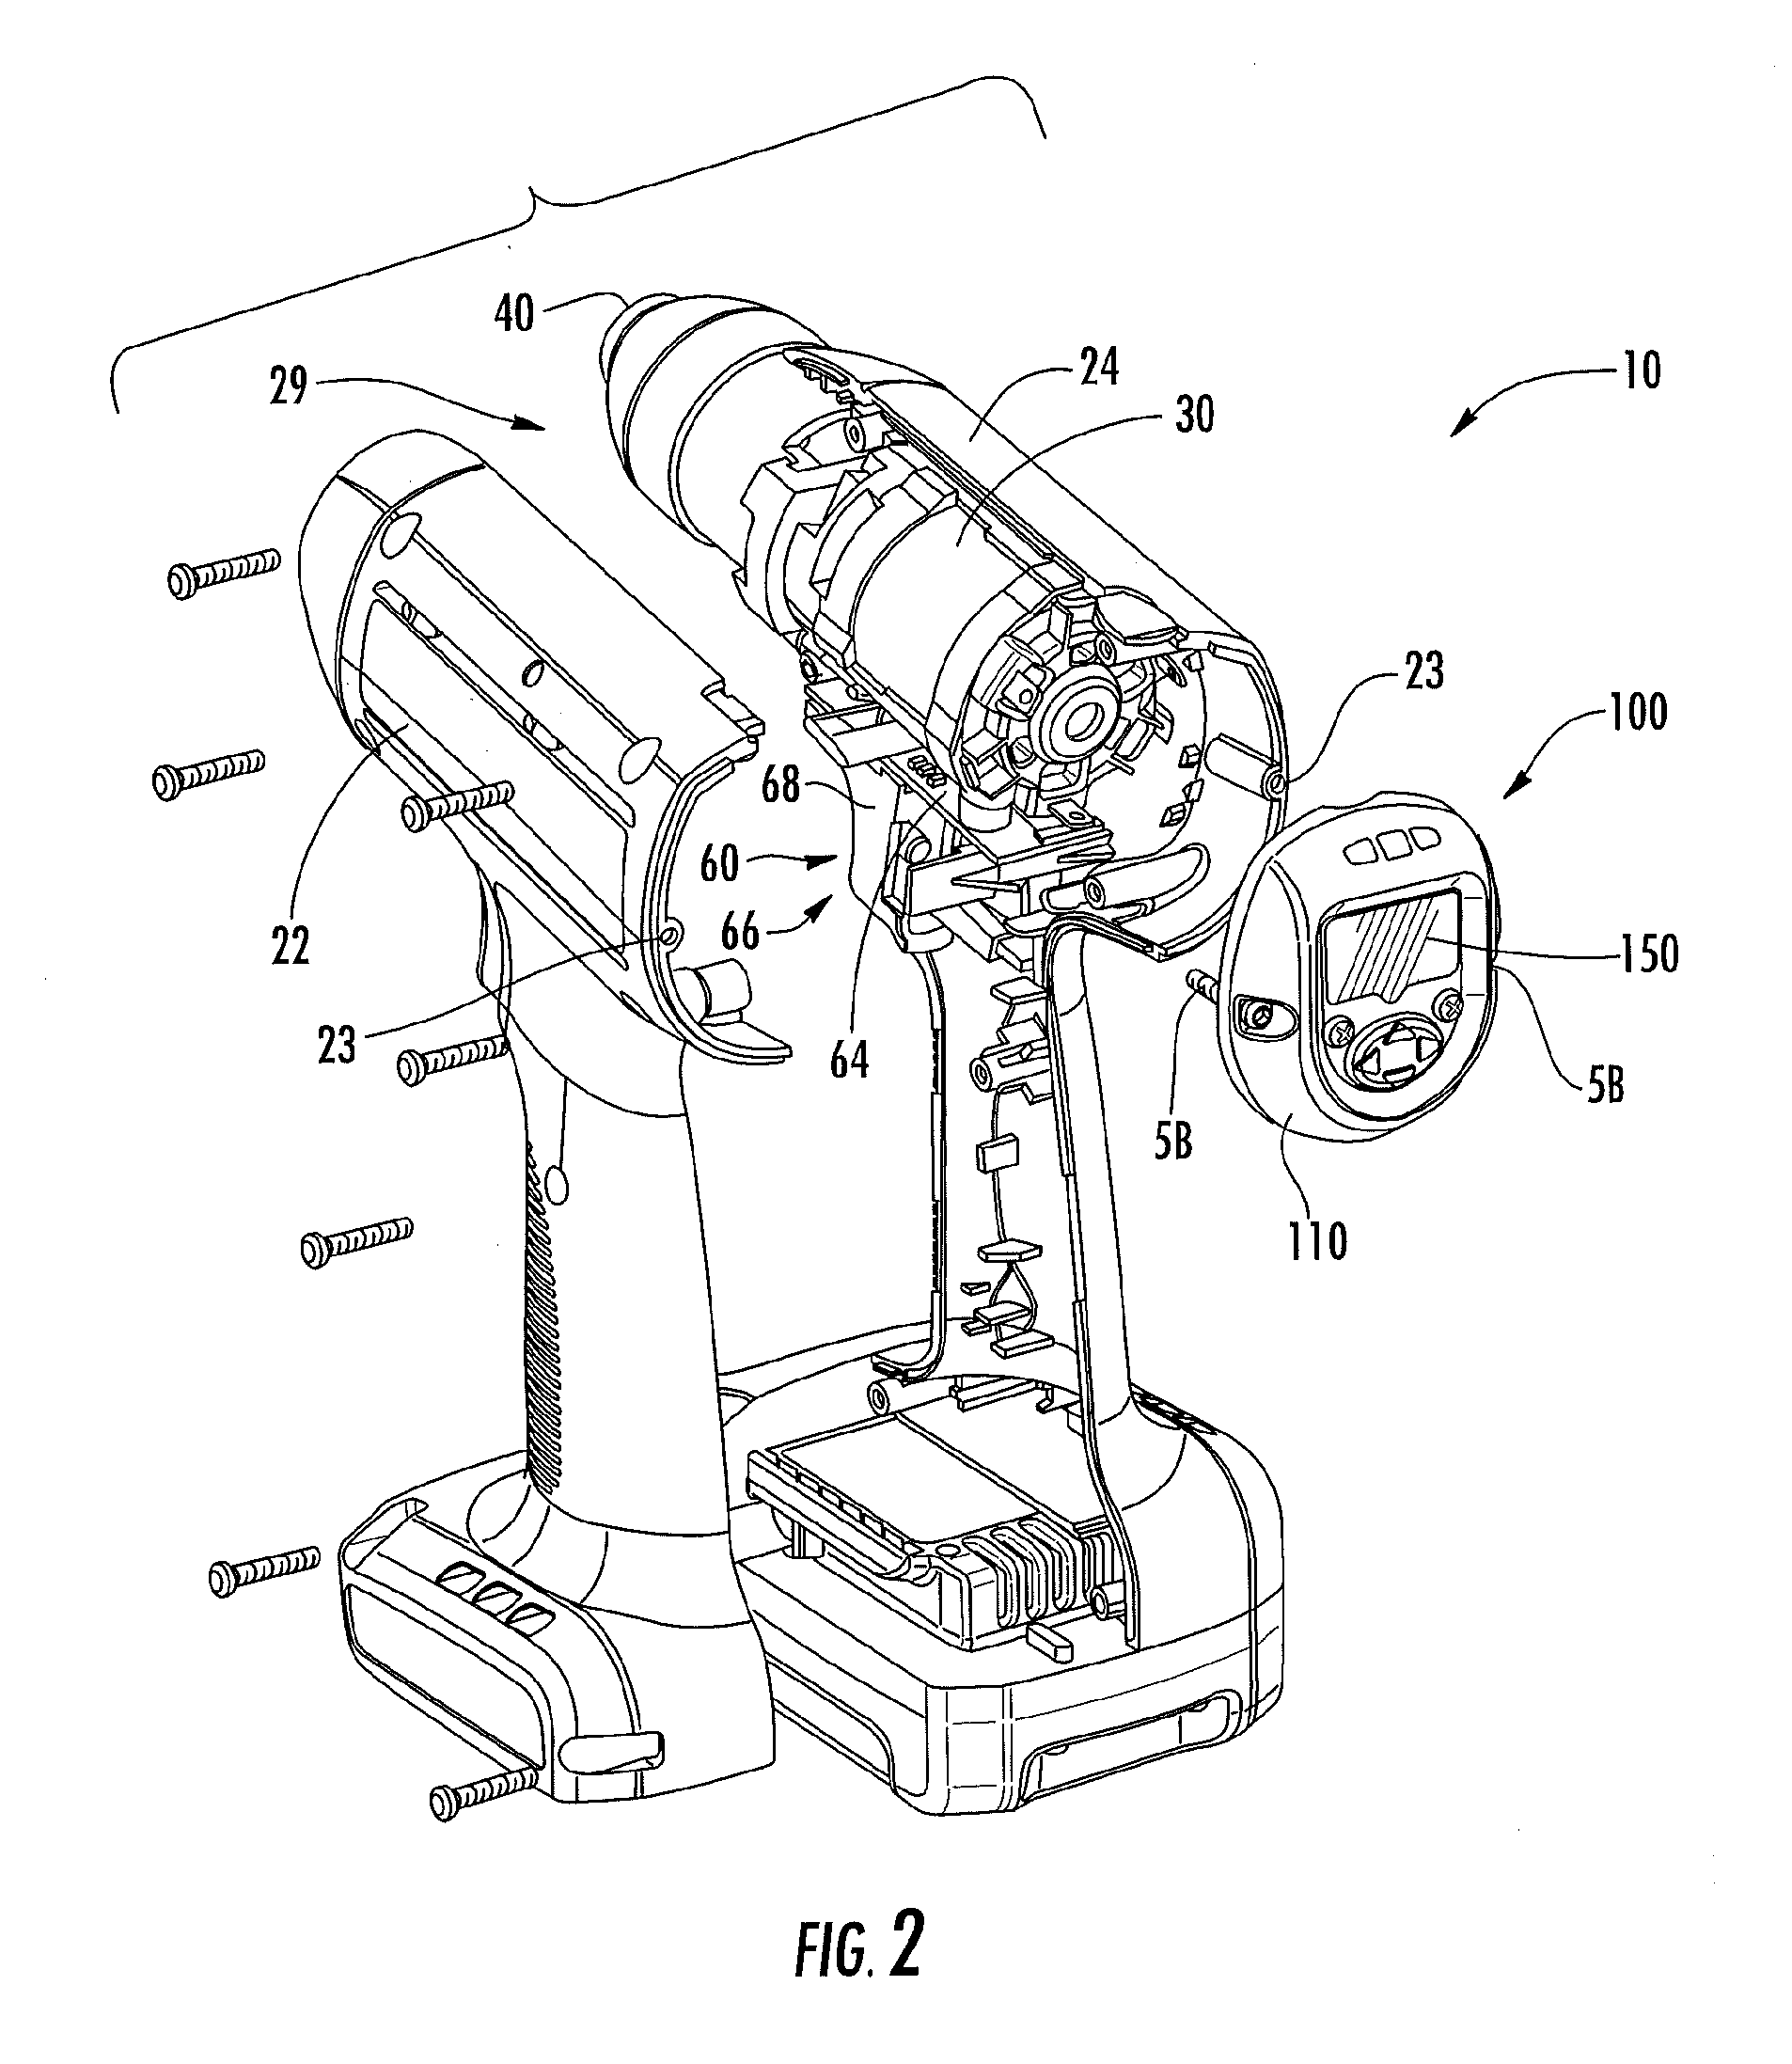 Display Assemblies Having Integrated Display Covers and Light Pipes and Handheld Power Tools and Methods Including Same